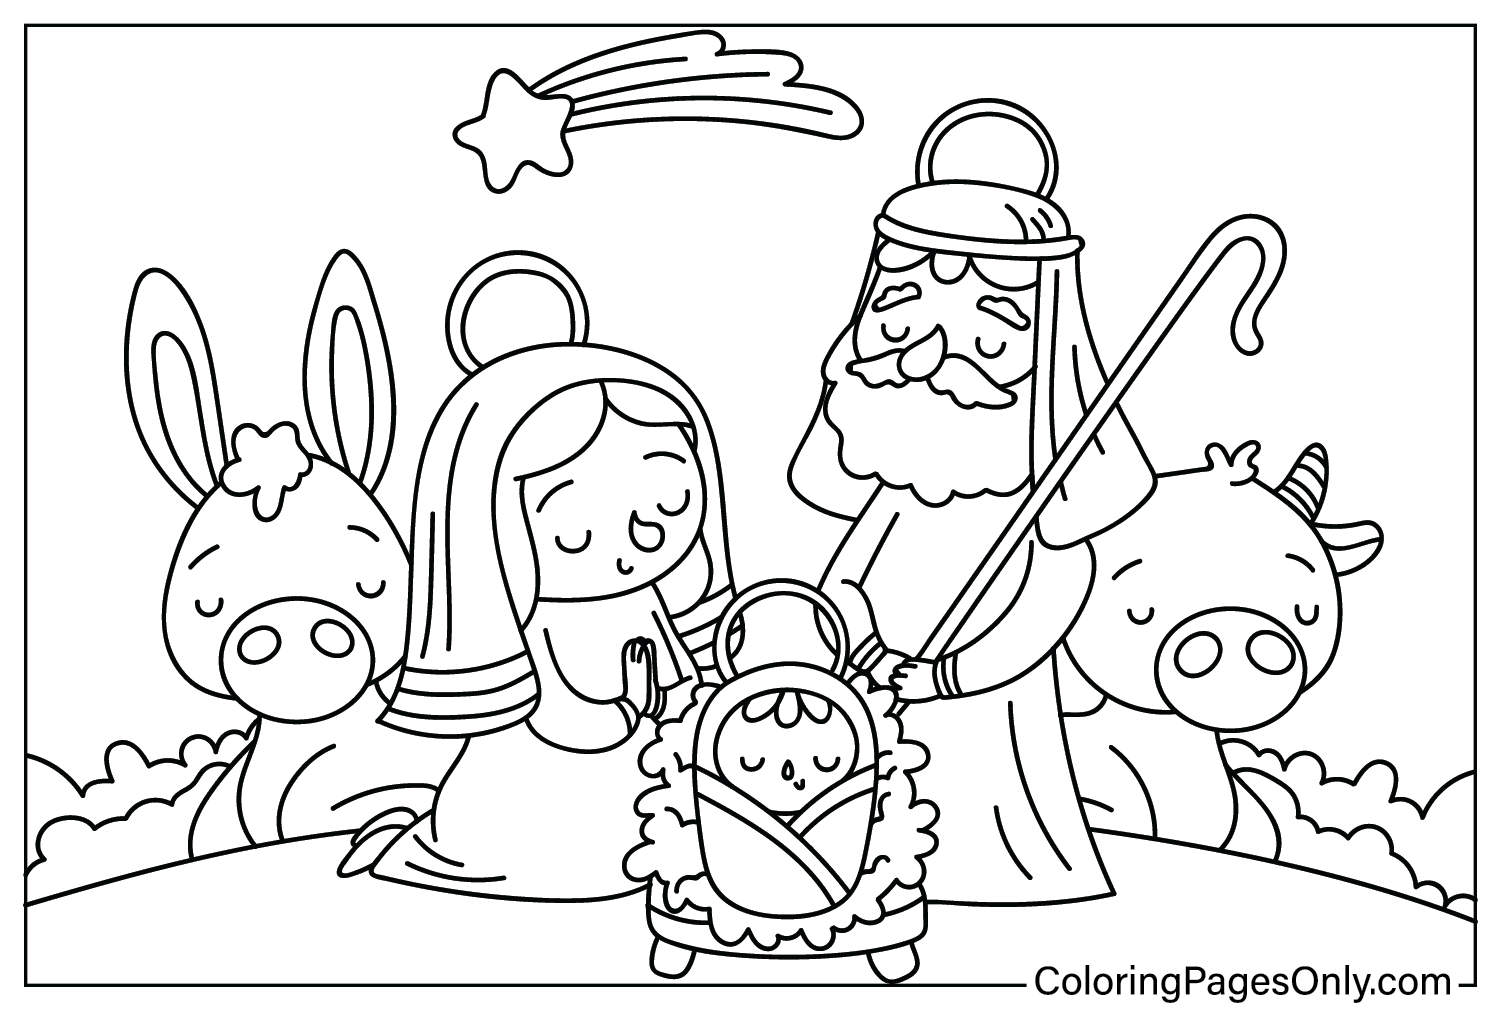 22 Nativity Coloring Pages - ColoringPagesOnly.com